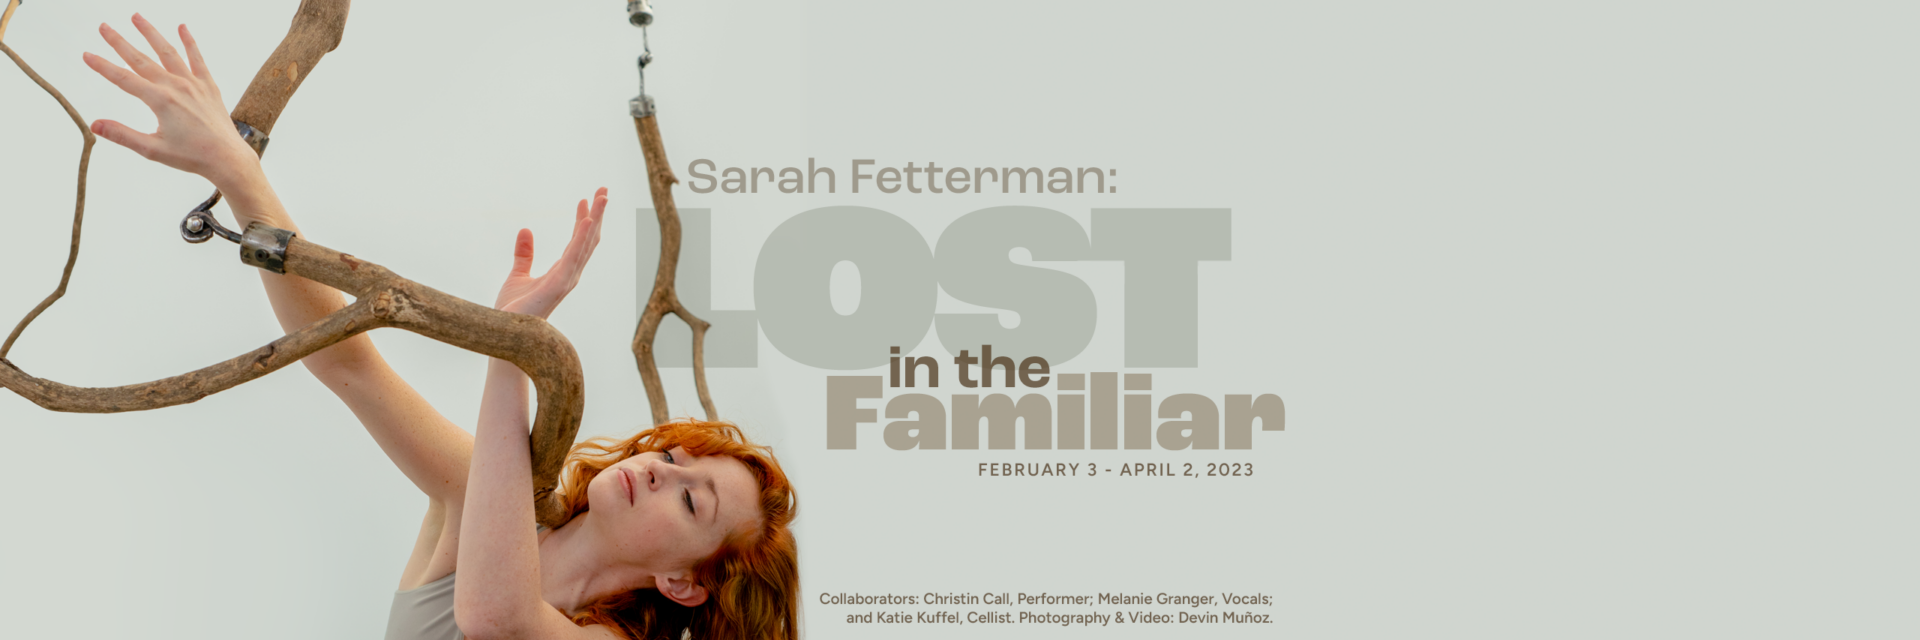 Gallery 2 - Sarah Fetterman: Lost in the Familiar Performance